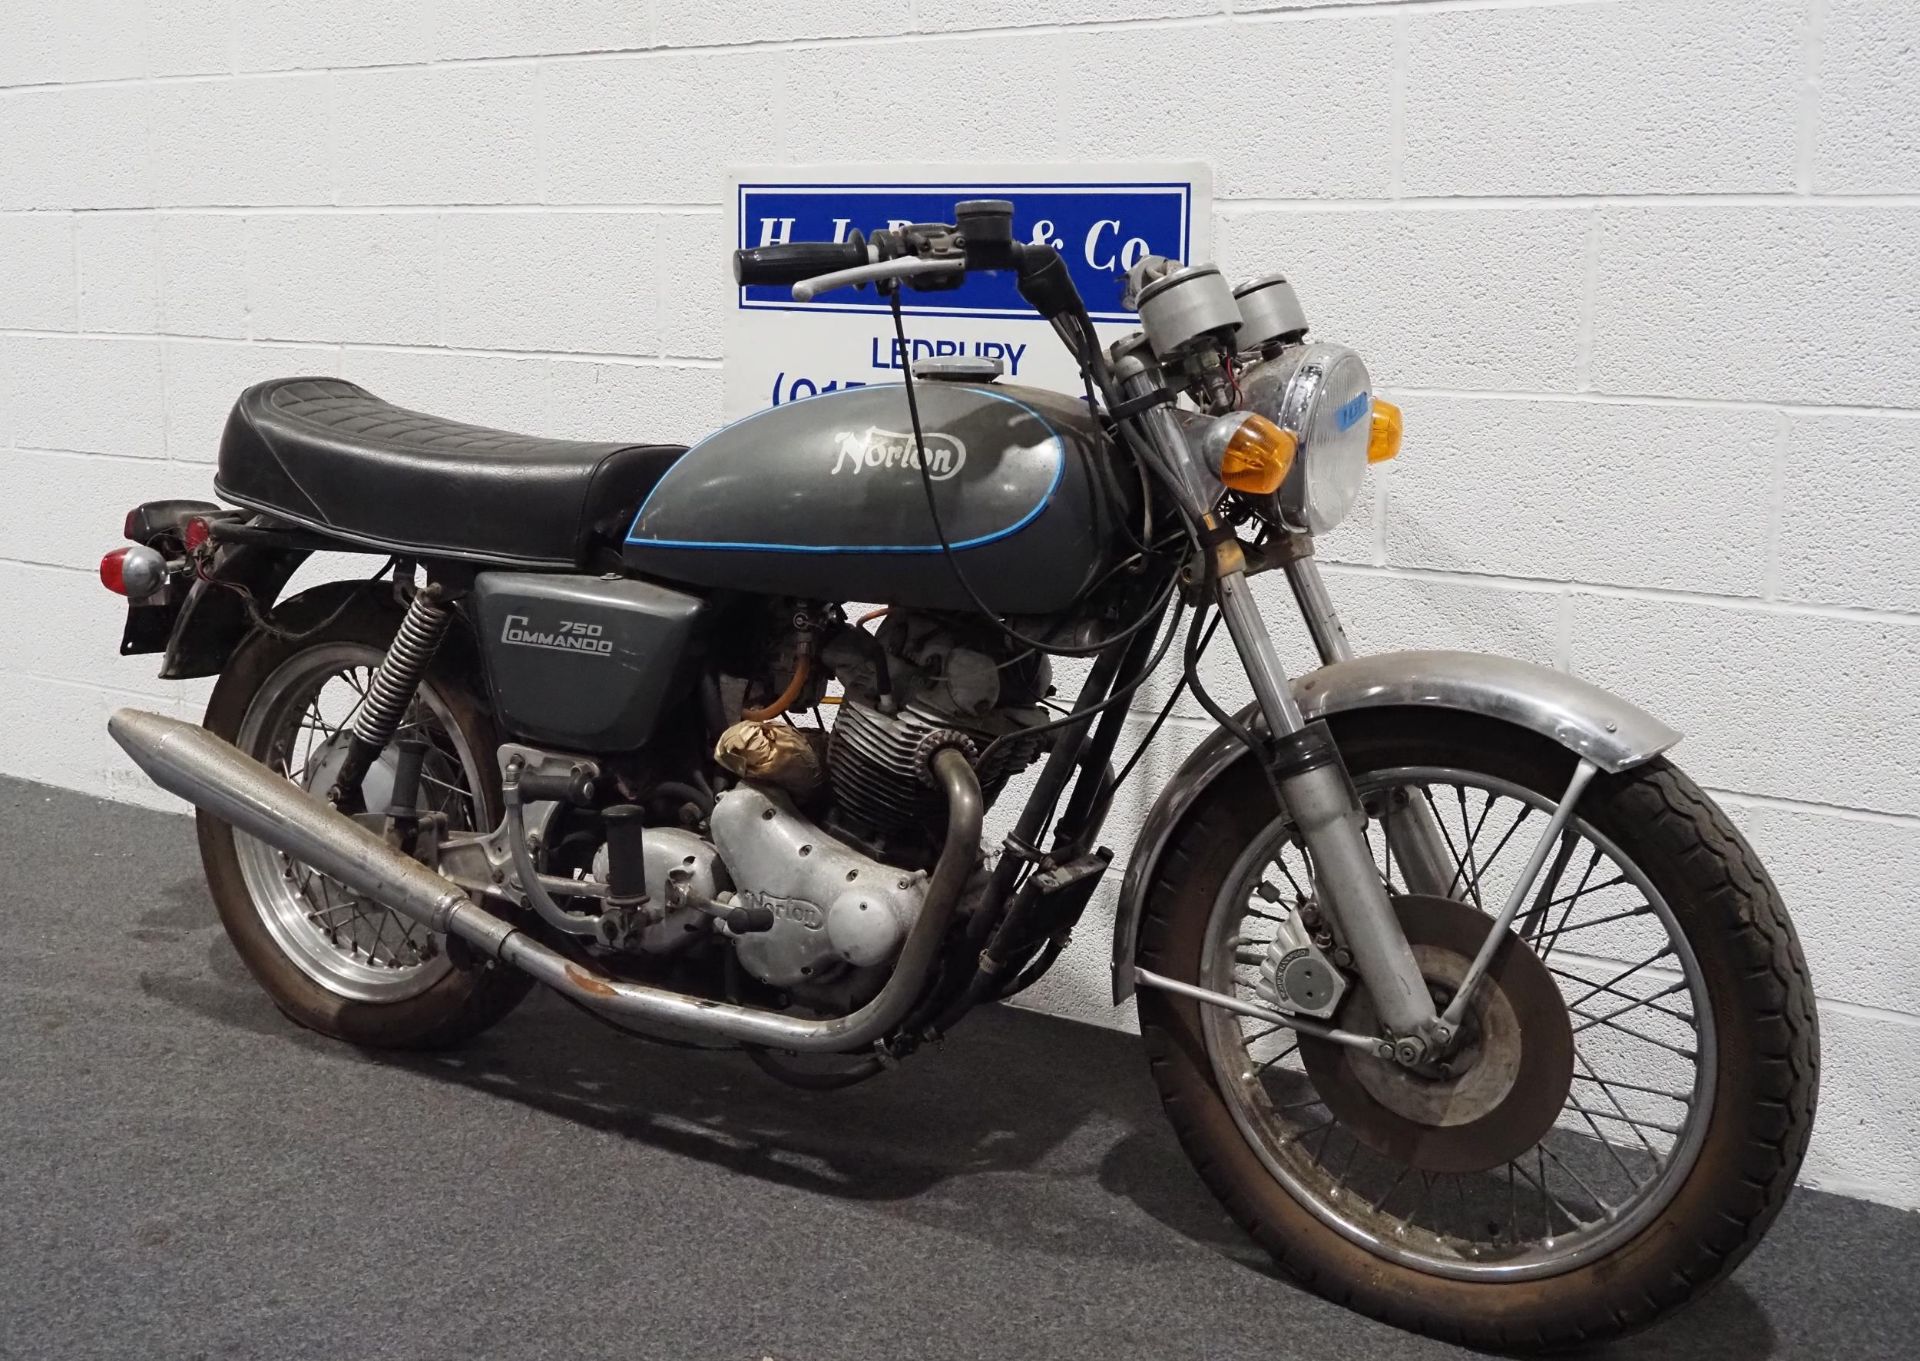 Norton Commando motorcycle, 1970, 750cc Frame no. 20M3S134305 Engine no. 134305 From a deceased - Image 2 of 6